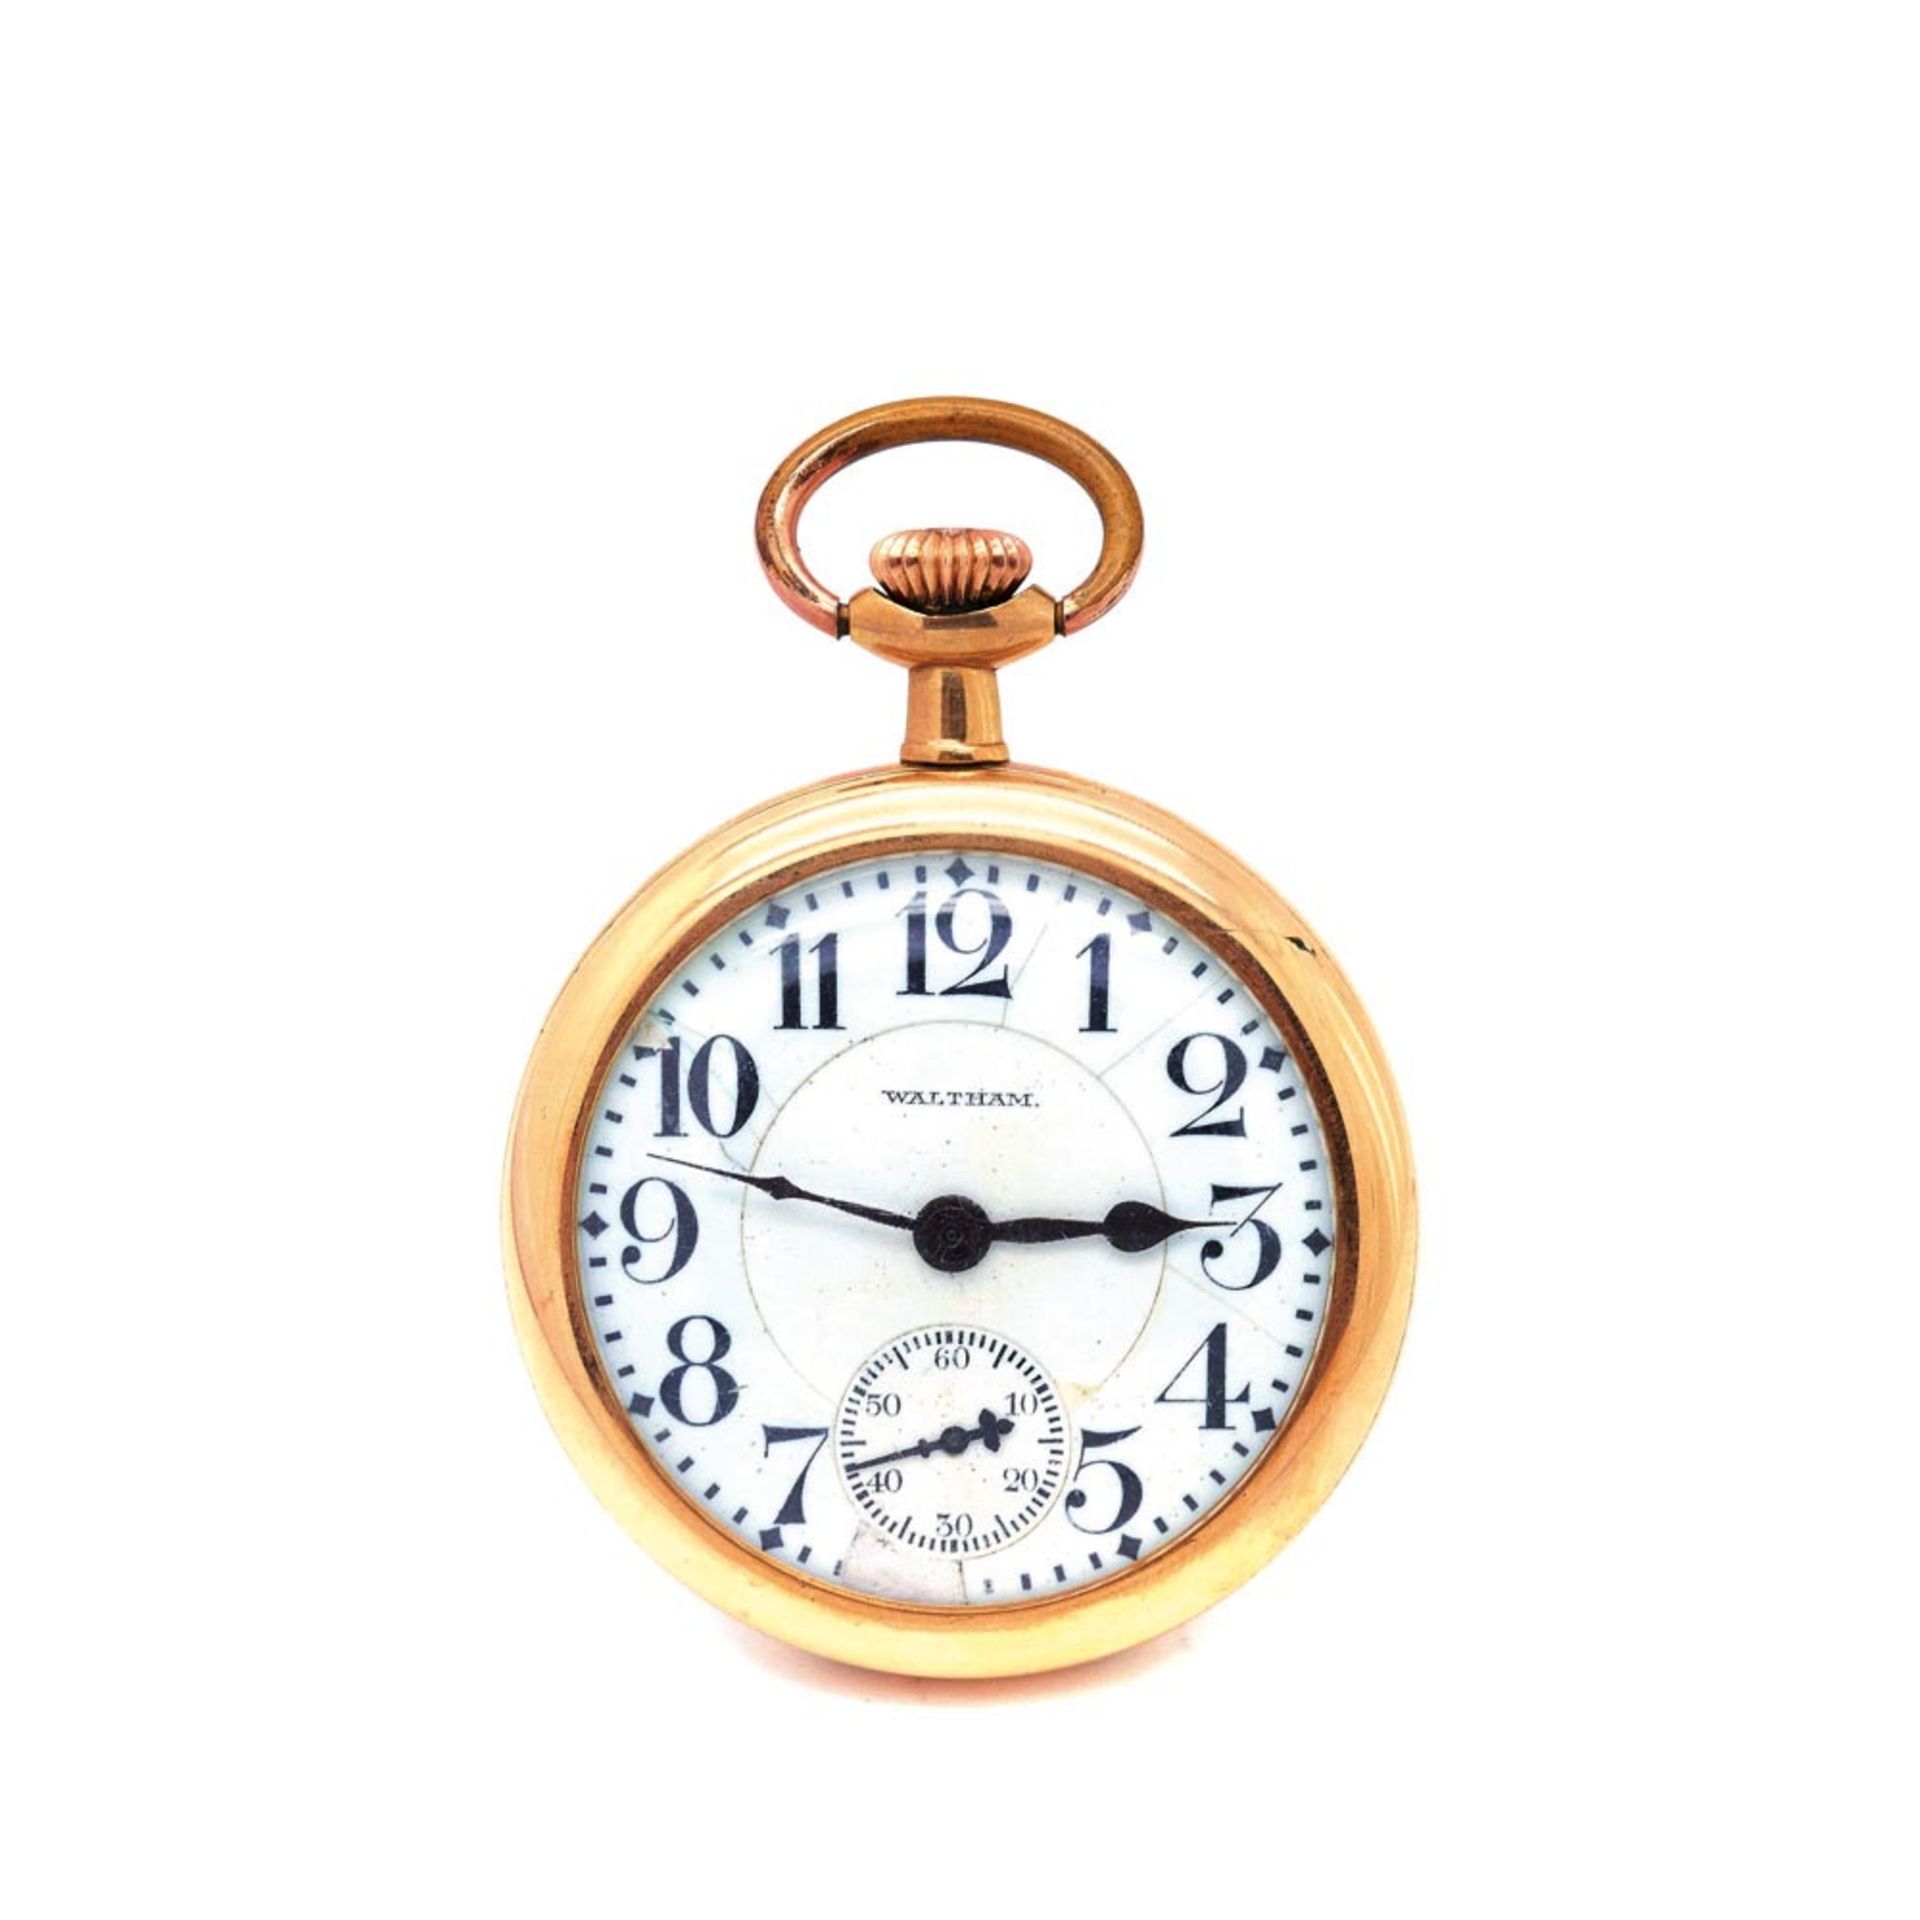 Watchman gold lepine pocket watch early 20th century